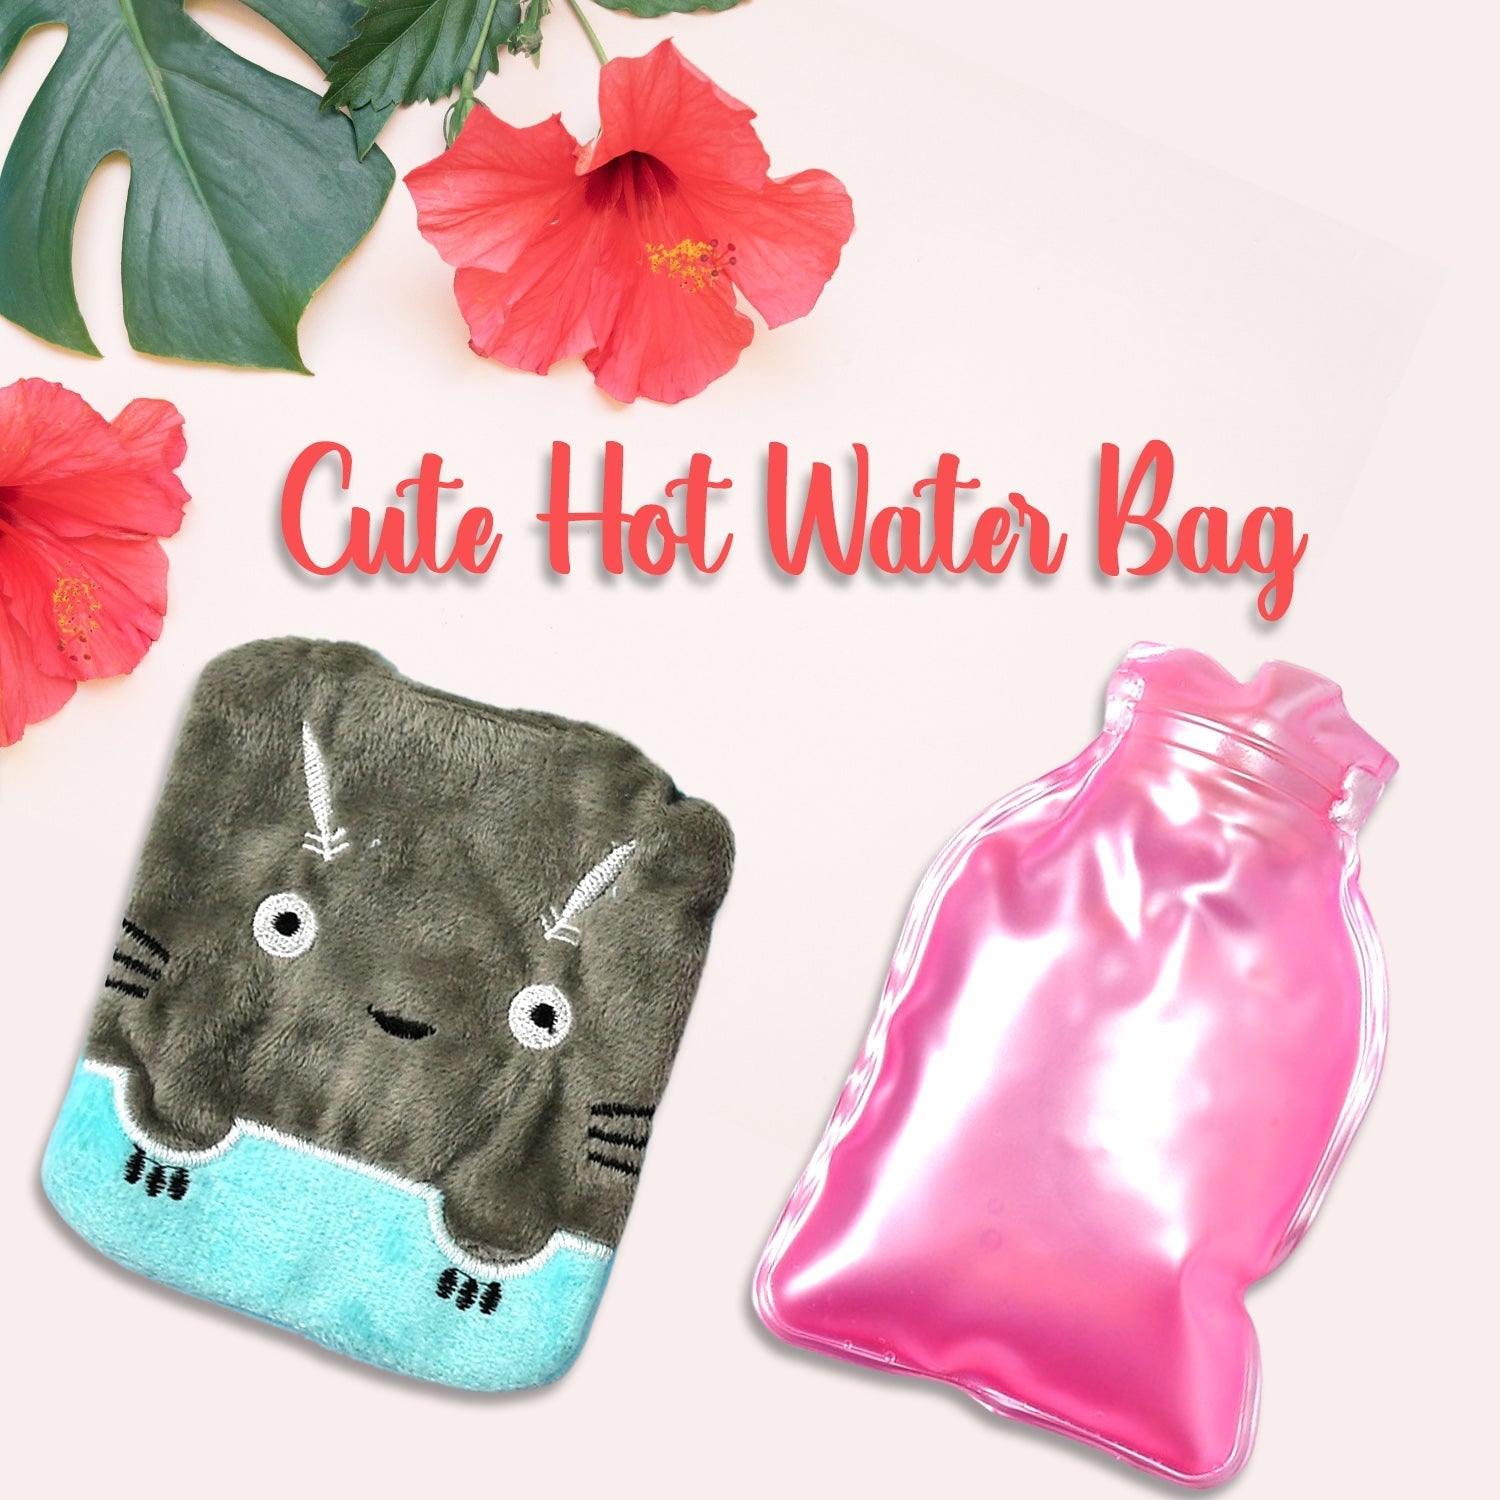 6528 Grey Cat Print small Hot Water Bag with Cover for Pain Relief, Neck, Shoulder Pain and Hand, Feet Warmer, Menstrual Cramps. primerce